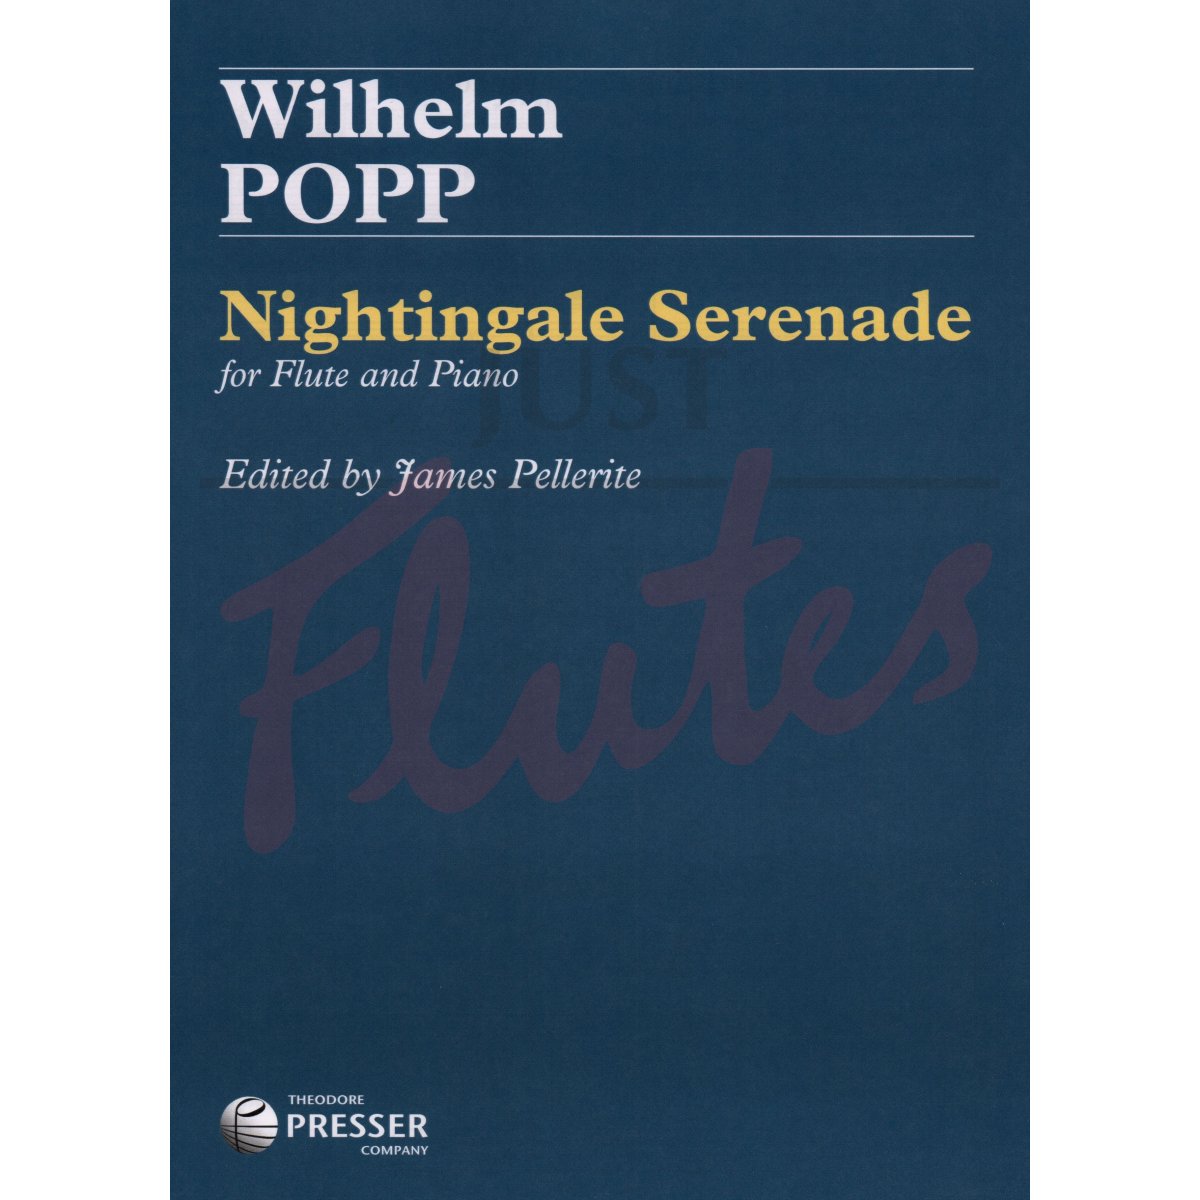 Nightingale Serenade for Flute and Piano